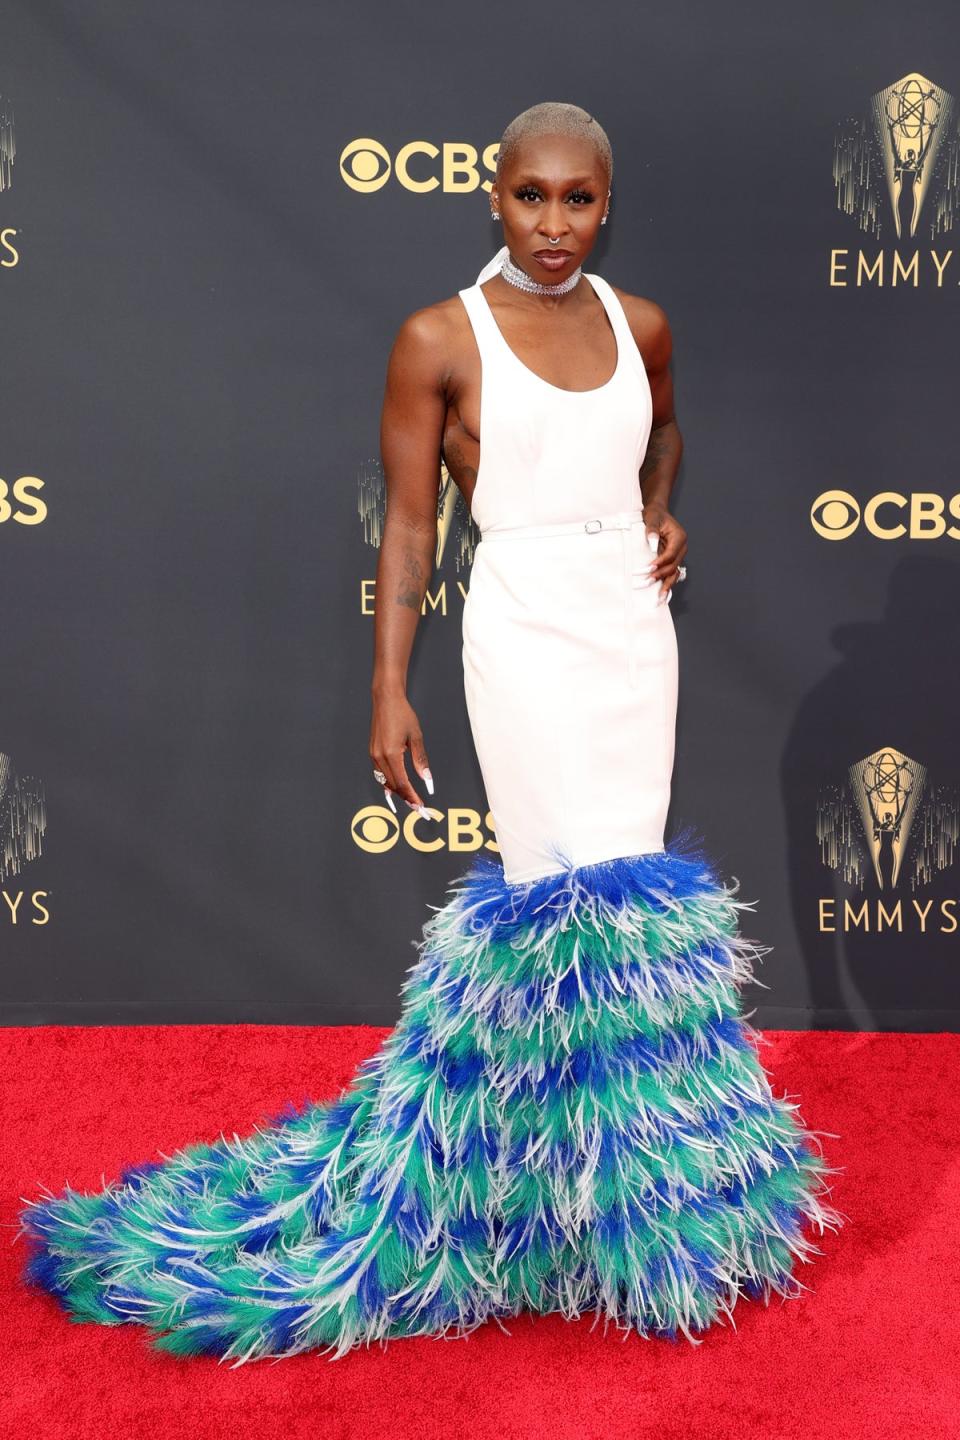 Cynthia Erivo at the 2021 Emmy Awards (Getty Images)